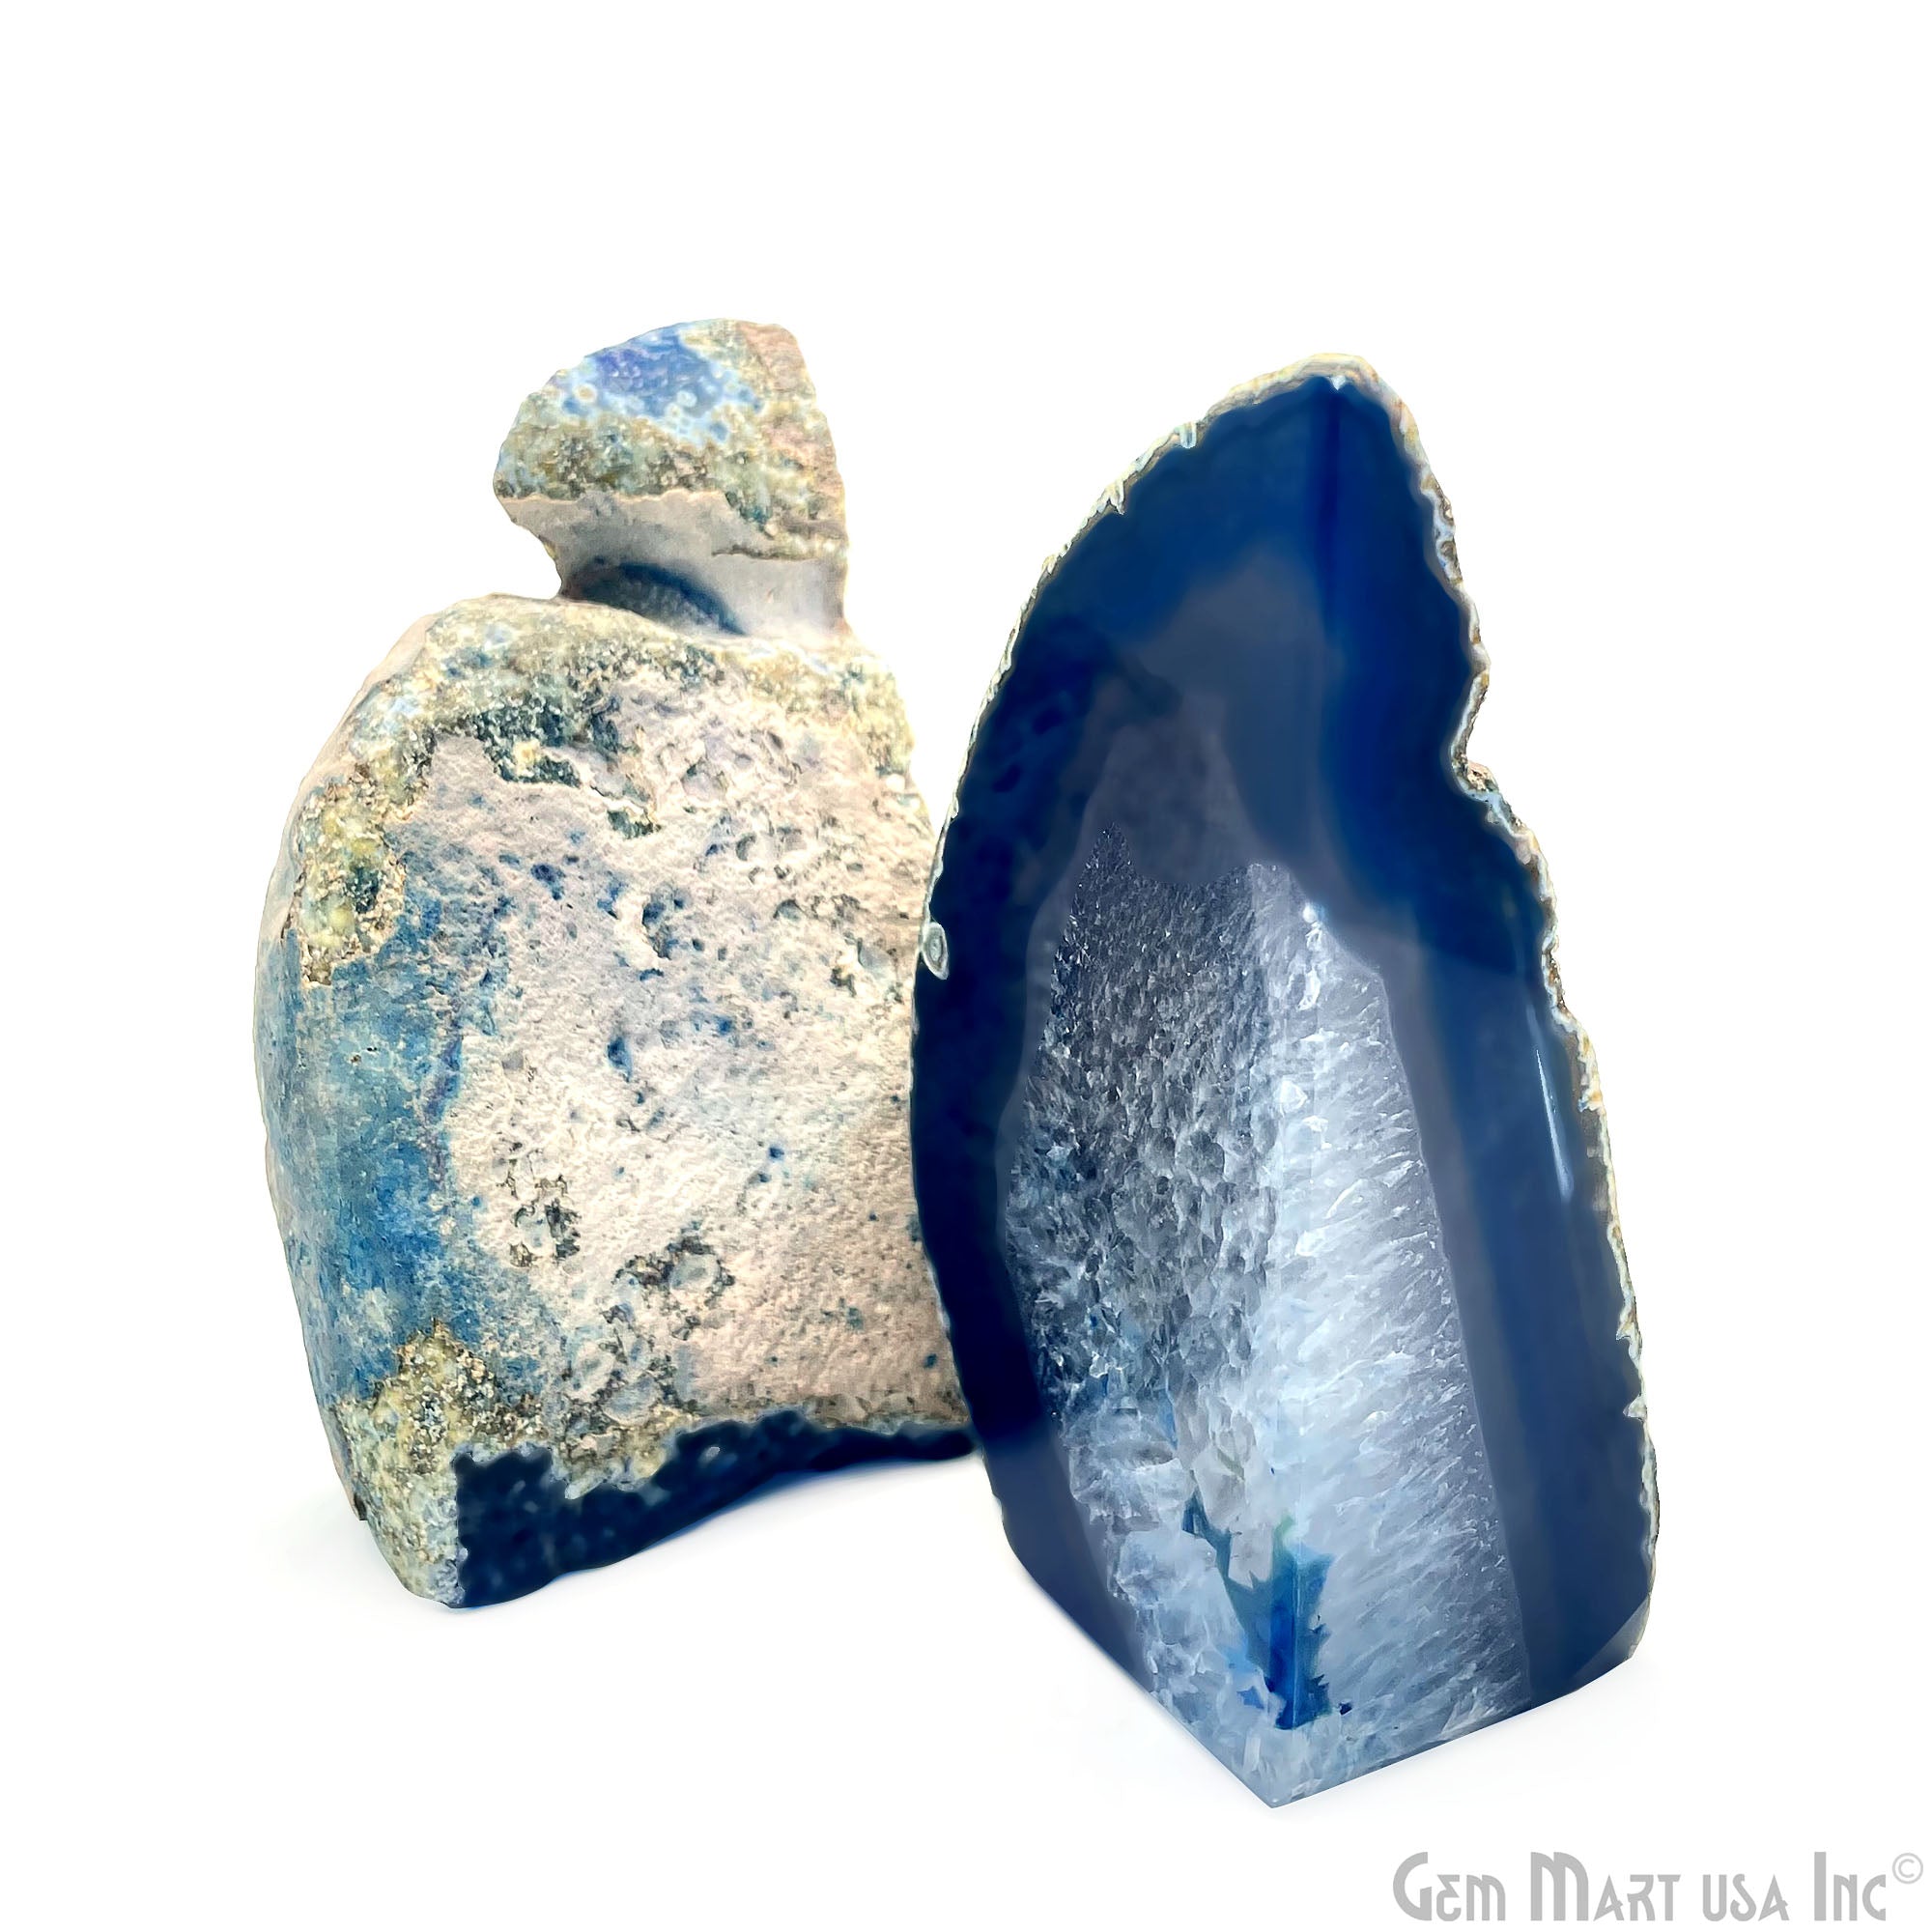 Large Geode Bookend. Blue Agate Bookend Pair. (2.03lbs, 5-6"inch). Mineral Rock Formation, Healing Energy Crystal, Home Decor. *Ships Free